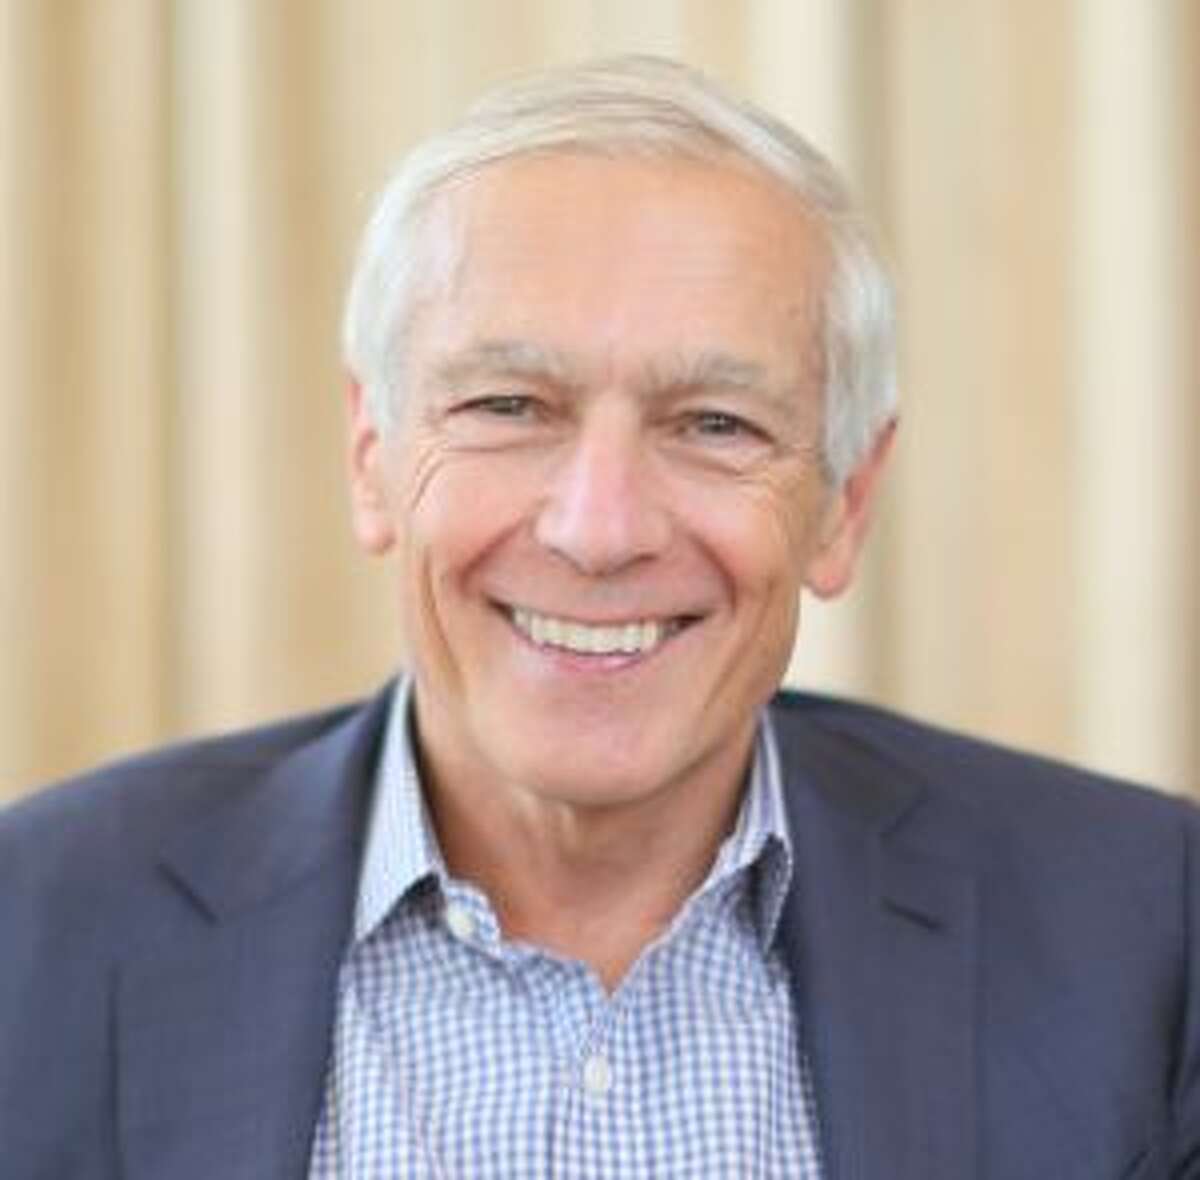 New Canaan Library and Grace Farms Foundation will present an insightful conversation with retired U.S. Army Gen. Wesley Clark, on the topics of global policy and America’s potential for growth and leadership. Retired U.S. Army Gen. Wesley Clark